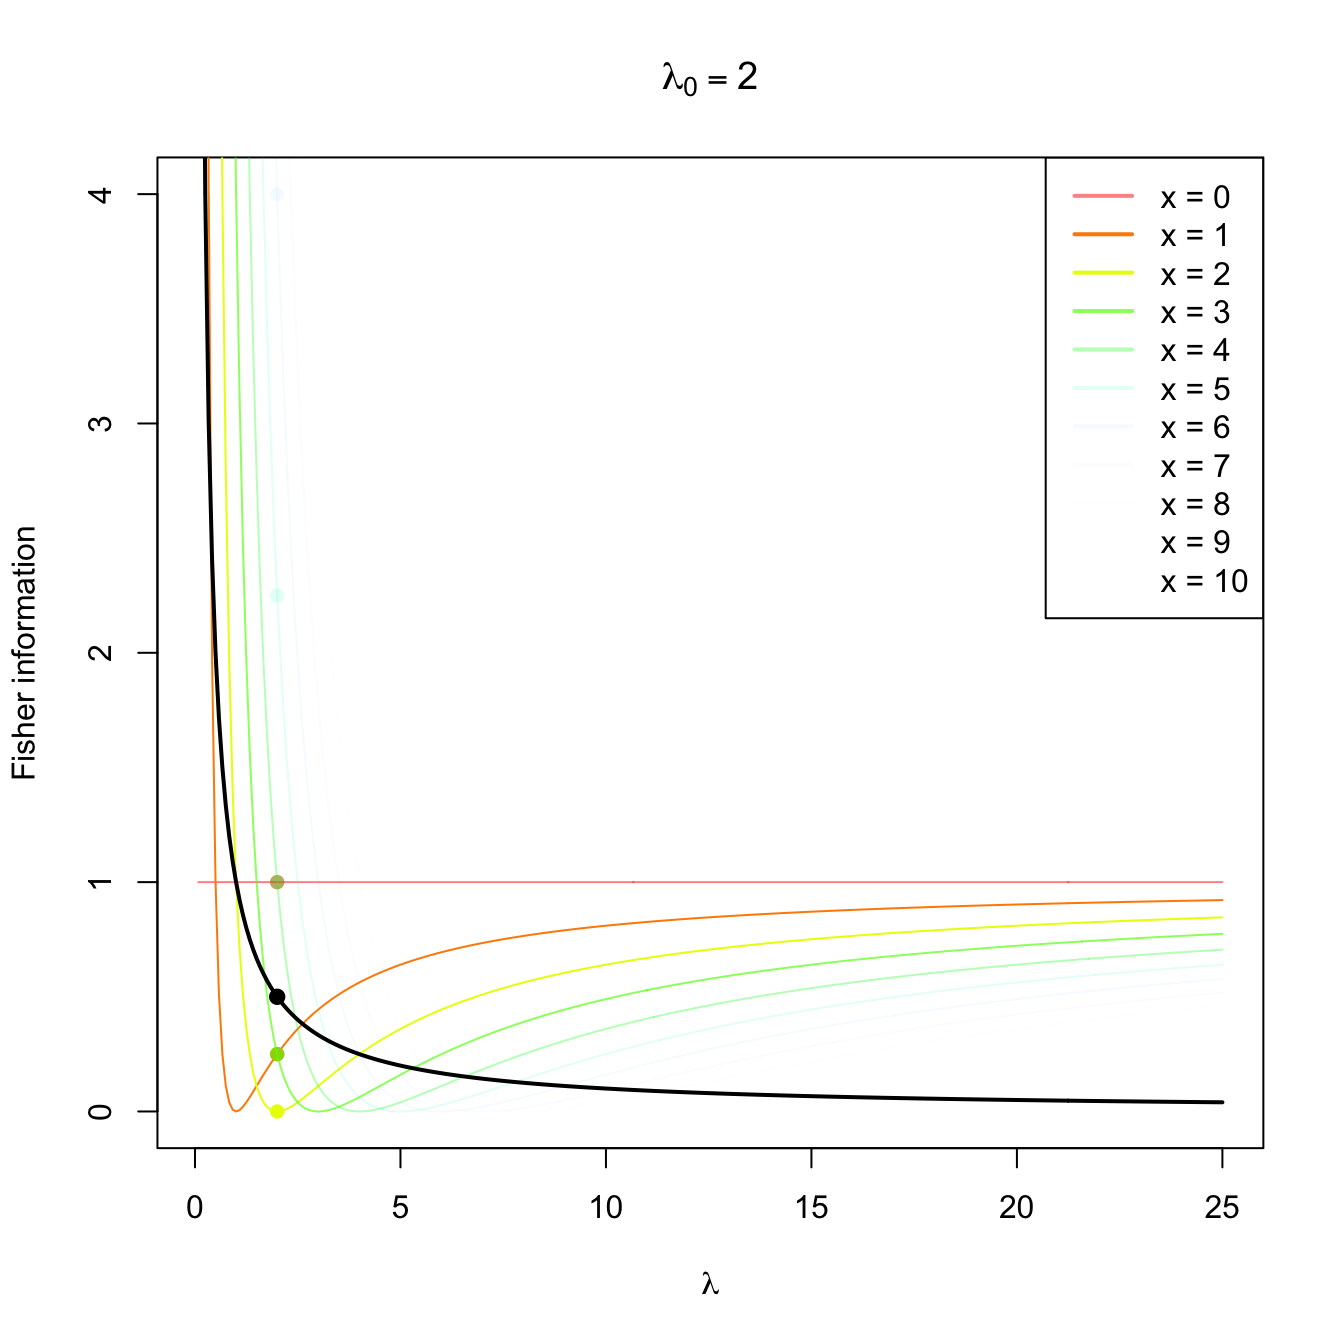 Fisher information integrand \(\lambda\mapsto \left(\partial \log f(x;\lambda)/\partial \lambda\right)^2\) in a \(\mathrm{Pois}(\lambda_0)\) distribution with \(\lambda_0=2,5,10.\) The integrands are shown in different colors, with the color transparency indicating the probability of \(x\) according to \(\mathrm{Pois}(\lambda_0)\) (the darker the color, the higher the probability). The Fisher information curve \(\lambda\mapsto \mathcal{I}(\lambda)\) is shown in black, with a black point signaling the value \(\mathcal{I}(\lambda_0).\) The colored points indicate the contribution of each \(x\) to the Fisher information.